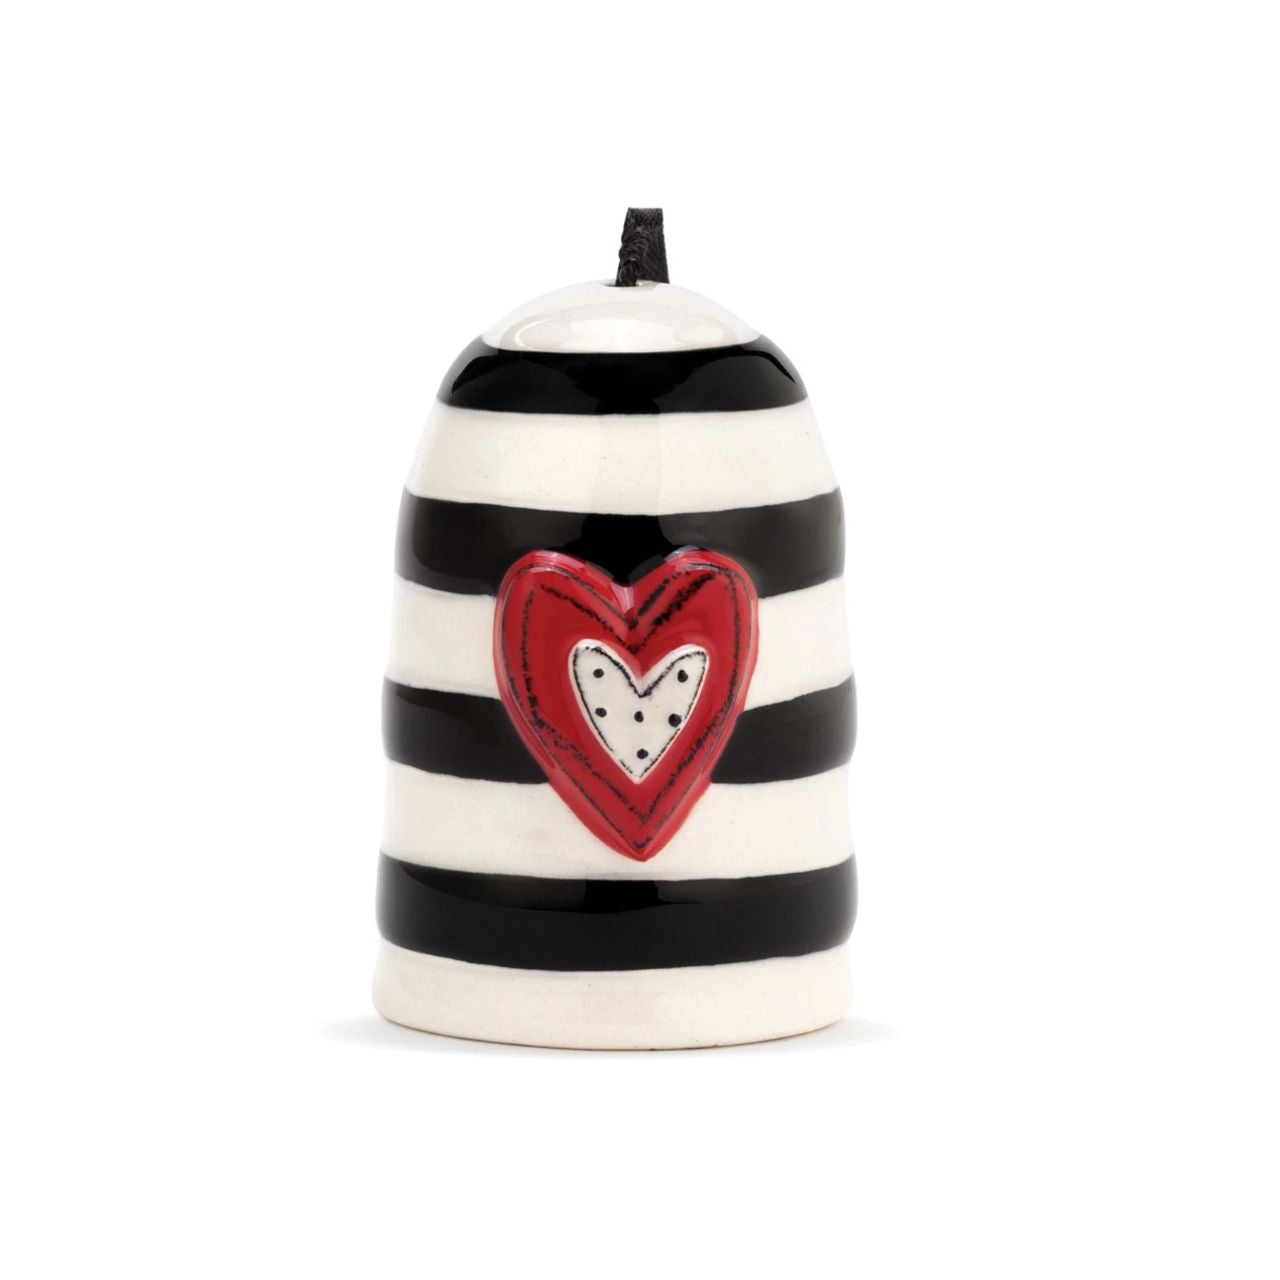 Heartful Home Bell - Love by Demdaco  Add a whimsical, happy touch to your home with Tracy Pesche's uplifting ceramic art. Her hand-painted Heartful Home Bell - Love is a bright token of love that makes a pleasing, sing-song jingle whenever you desire. It is white with an array of beautiful black stripes and a bold red heart with a polka dot centre. It bears the simple word, "Love."